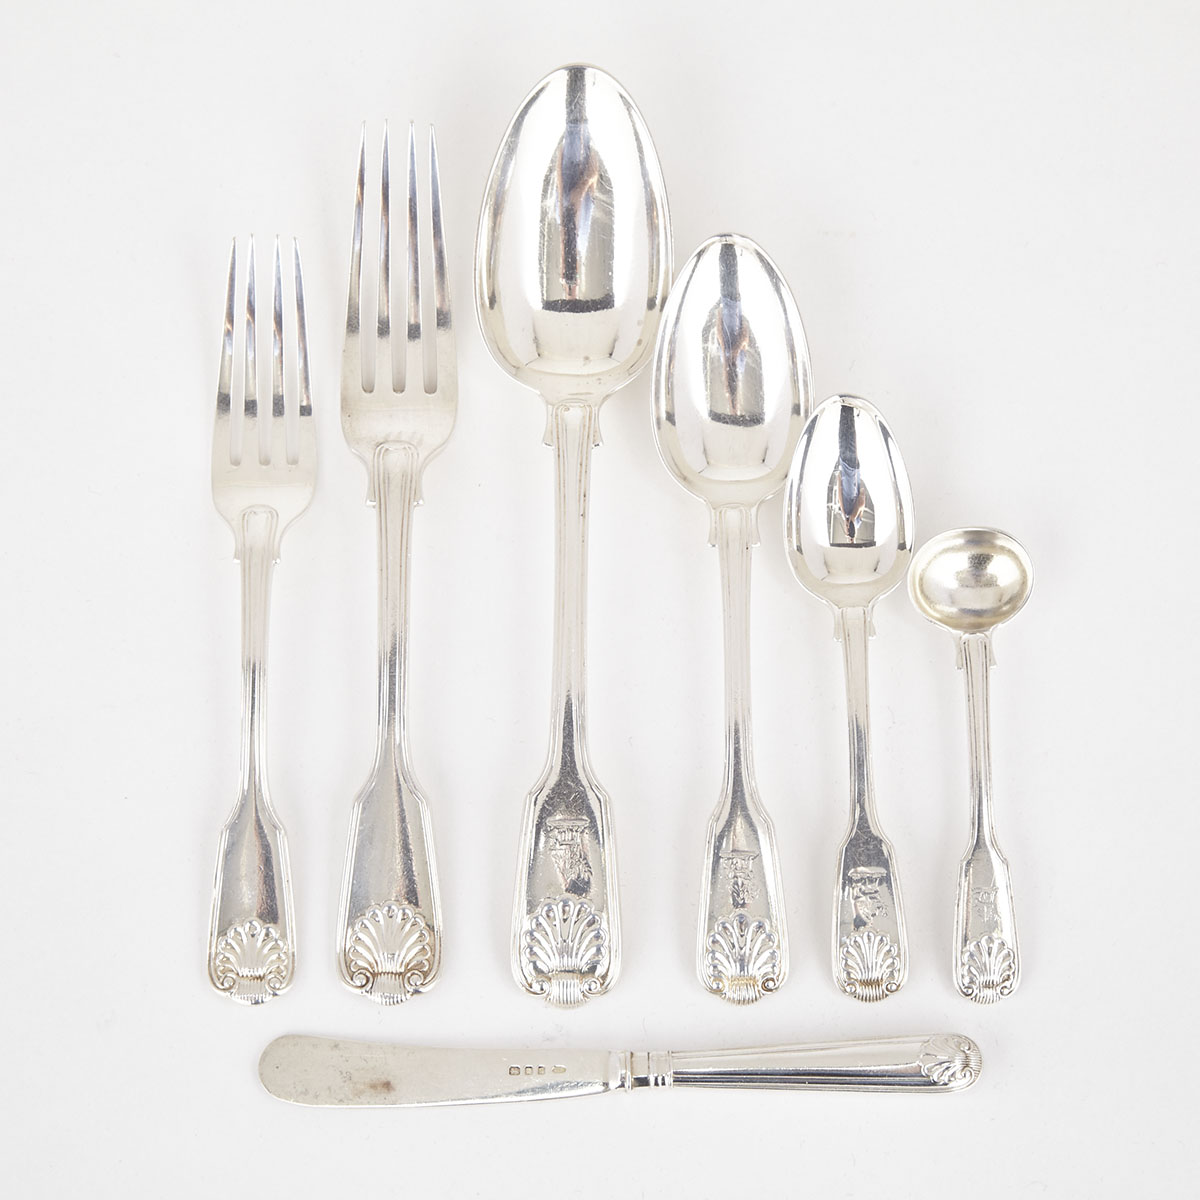 Victorian Silver Assembled Fiddle, Thread and Shell Pattern Flatware Service, mainly Elizabeth Eaton London 1856, 1857 and later